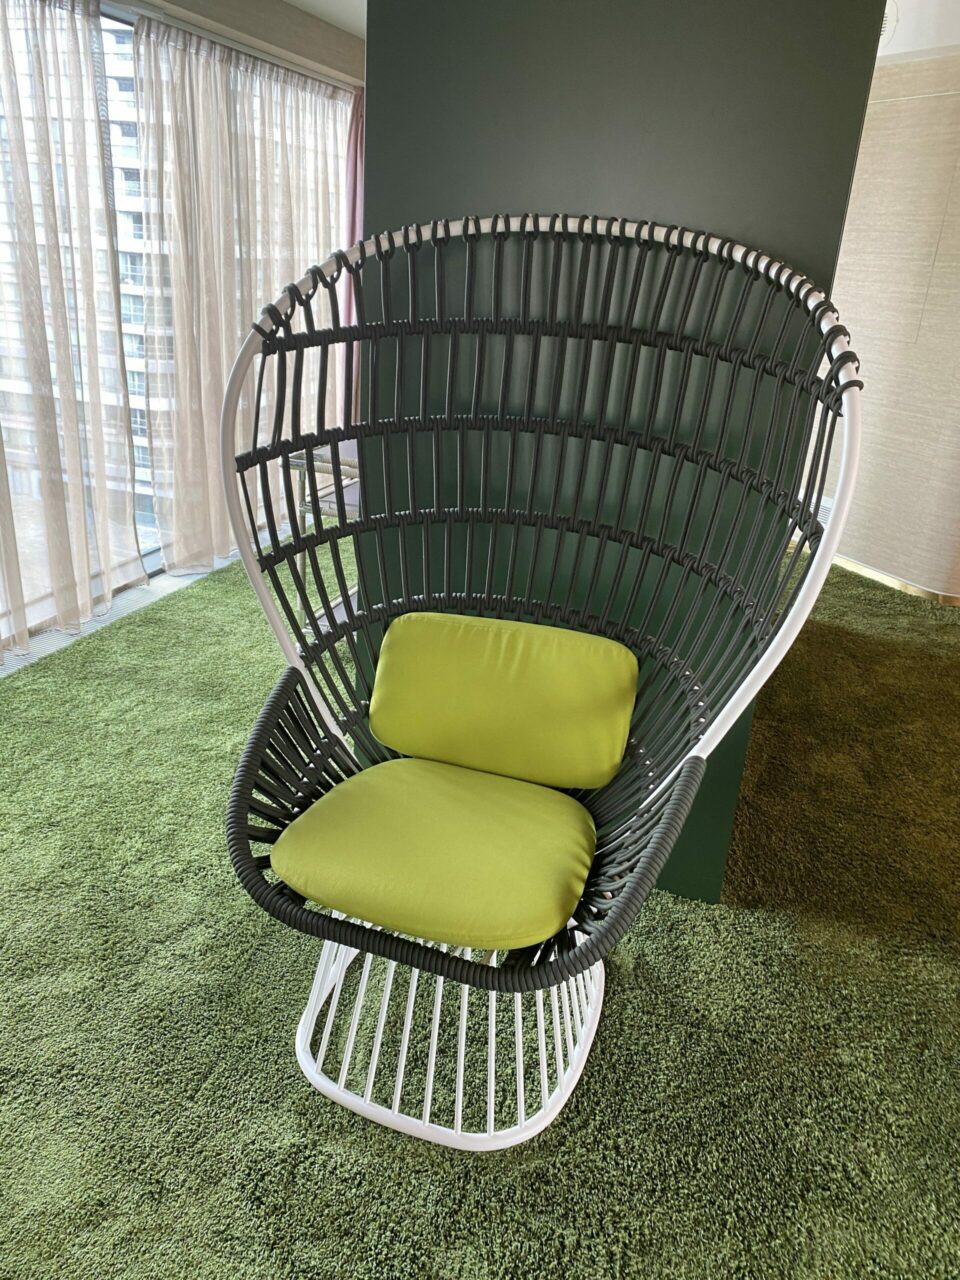 wicker back chairs at nHow London hotel